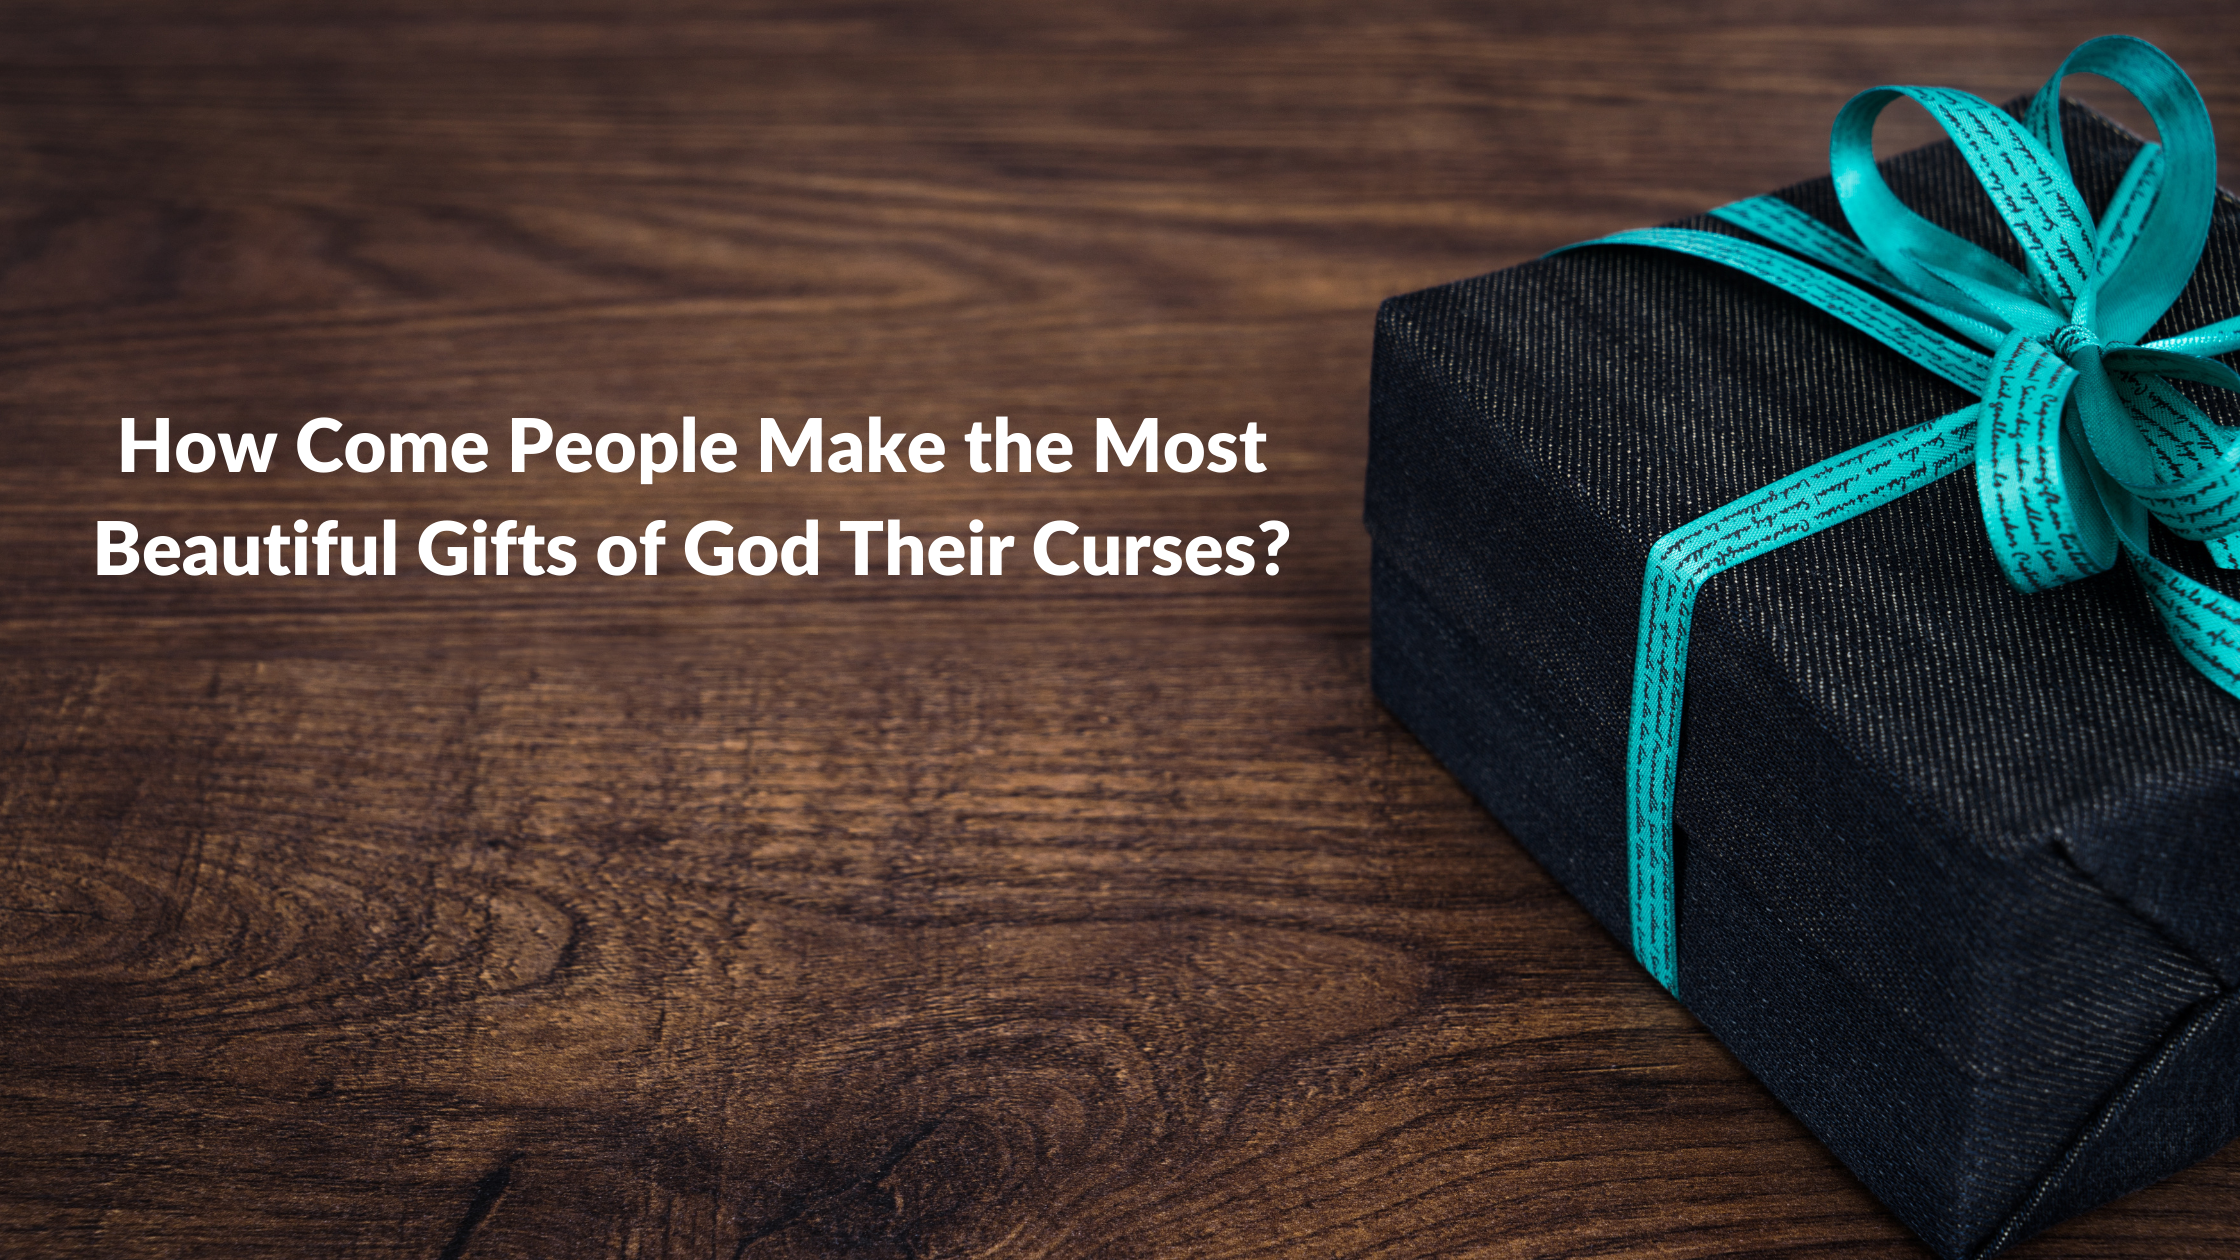 How Come People Make the Most Beautiful Gifts of God Their Curses?